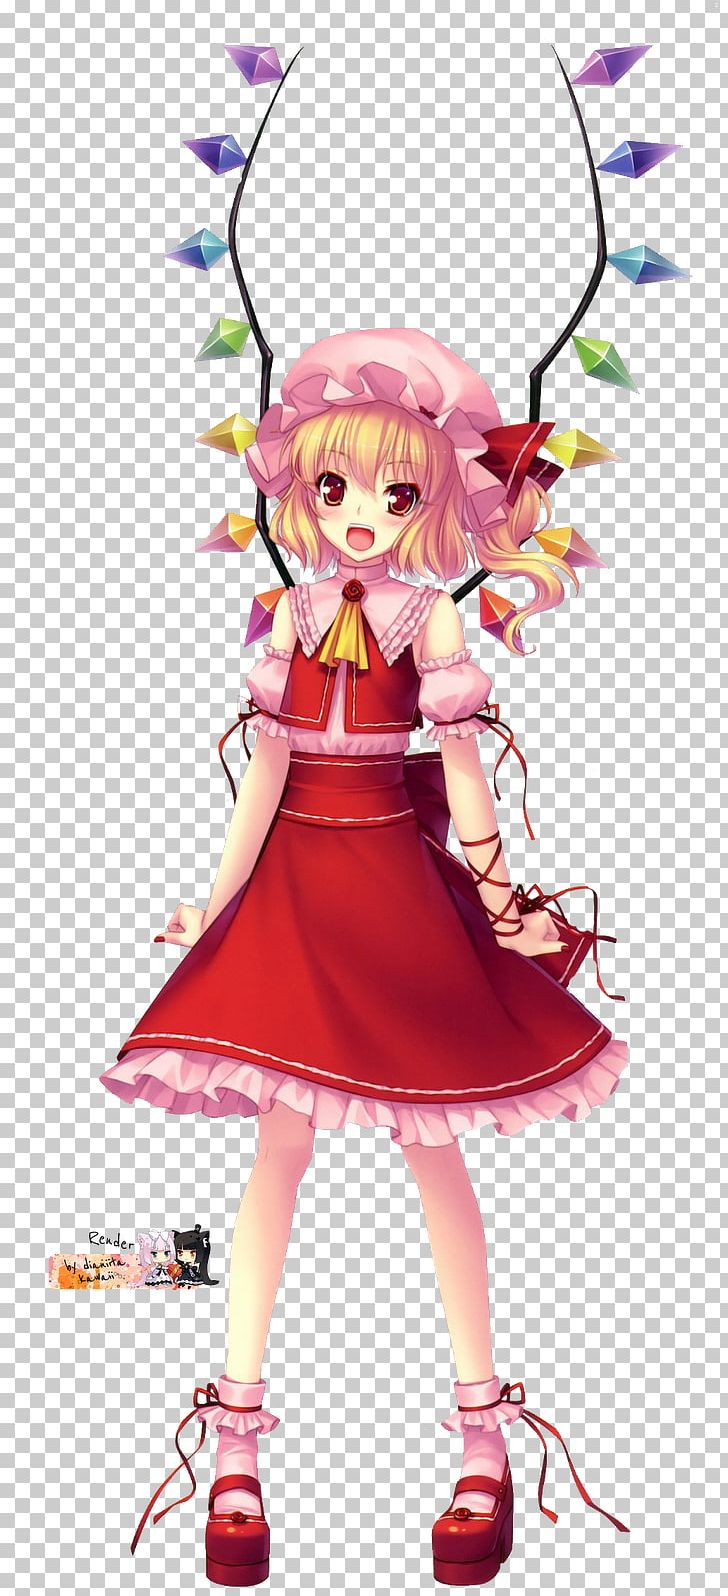 The Embodiment Of Scarlet Devil Perfect Cherry Blossom Scarlet Weather Rhapsody Reimu Hakurei Video Game PNG, Clipart, Anime, Boss, Costume, Embodiment Of Scarlet Devil, Fictional Character Free PNG Download